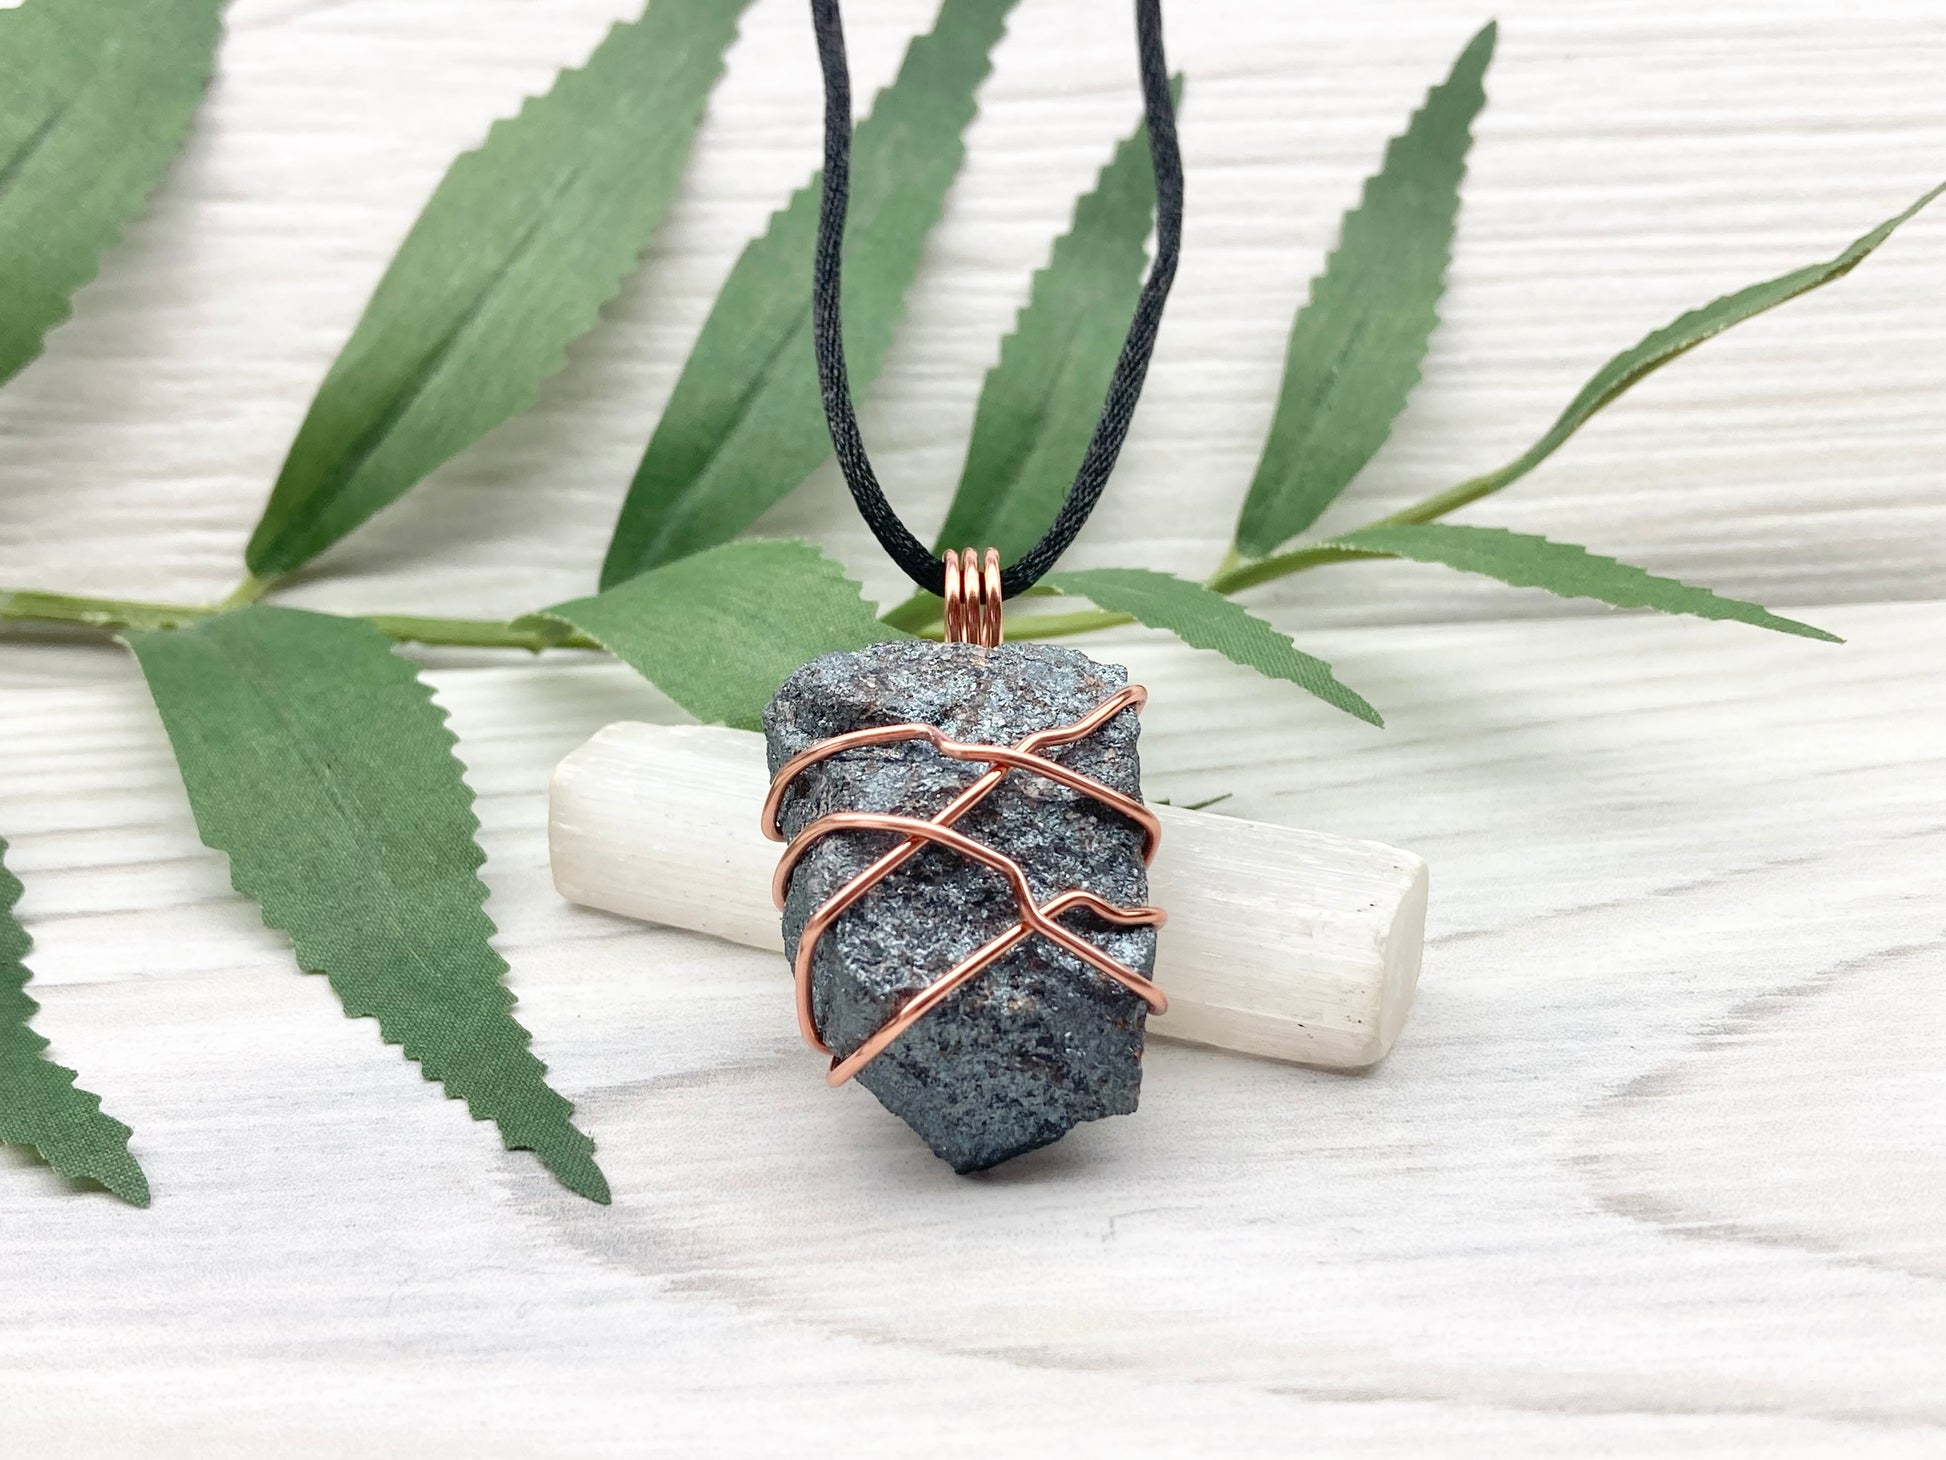 Raw Hematite Necklace. Gray Metallic Colored Stone Hand Wrapped With Pure Copper Wire. Comes On A Black Chain. New Age Jewelry For Him Or Her. Aquarius Zodiac Gemstone.